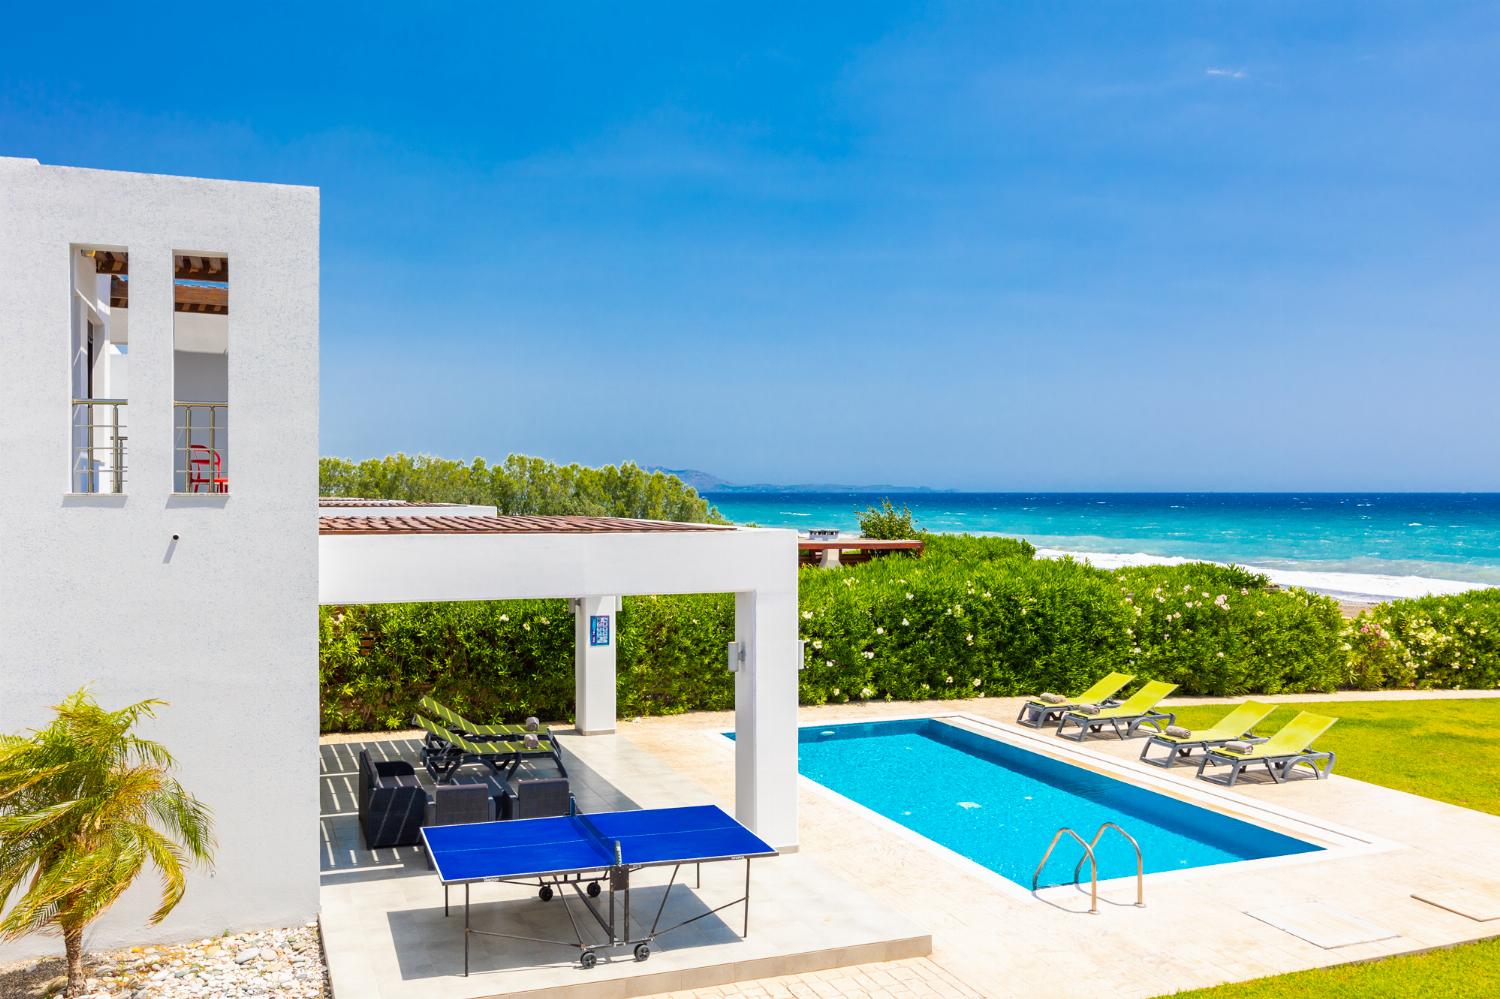 Beautiful villa with private pool, terrace, and garden with panoramic sea views